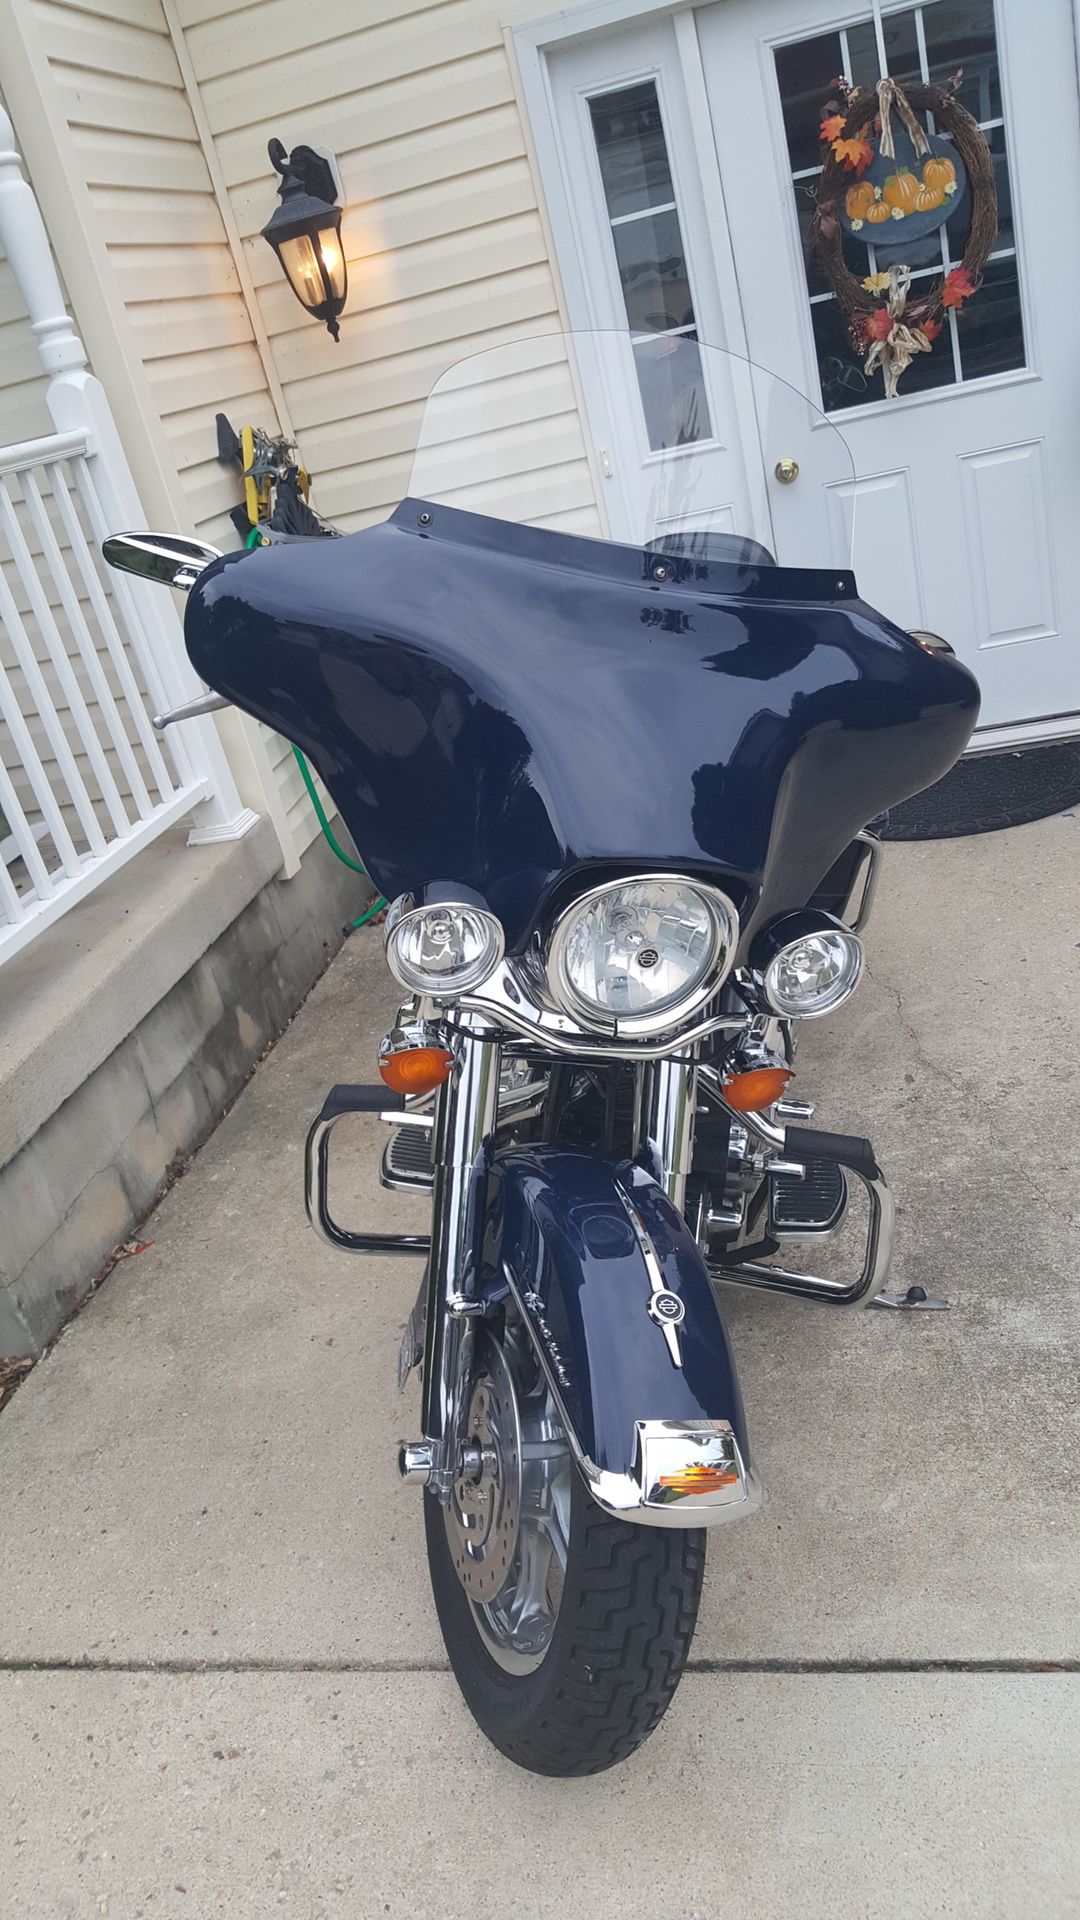 2004 Harley Davidson Road King, Peace Officer Special Edition